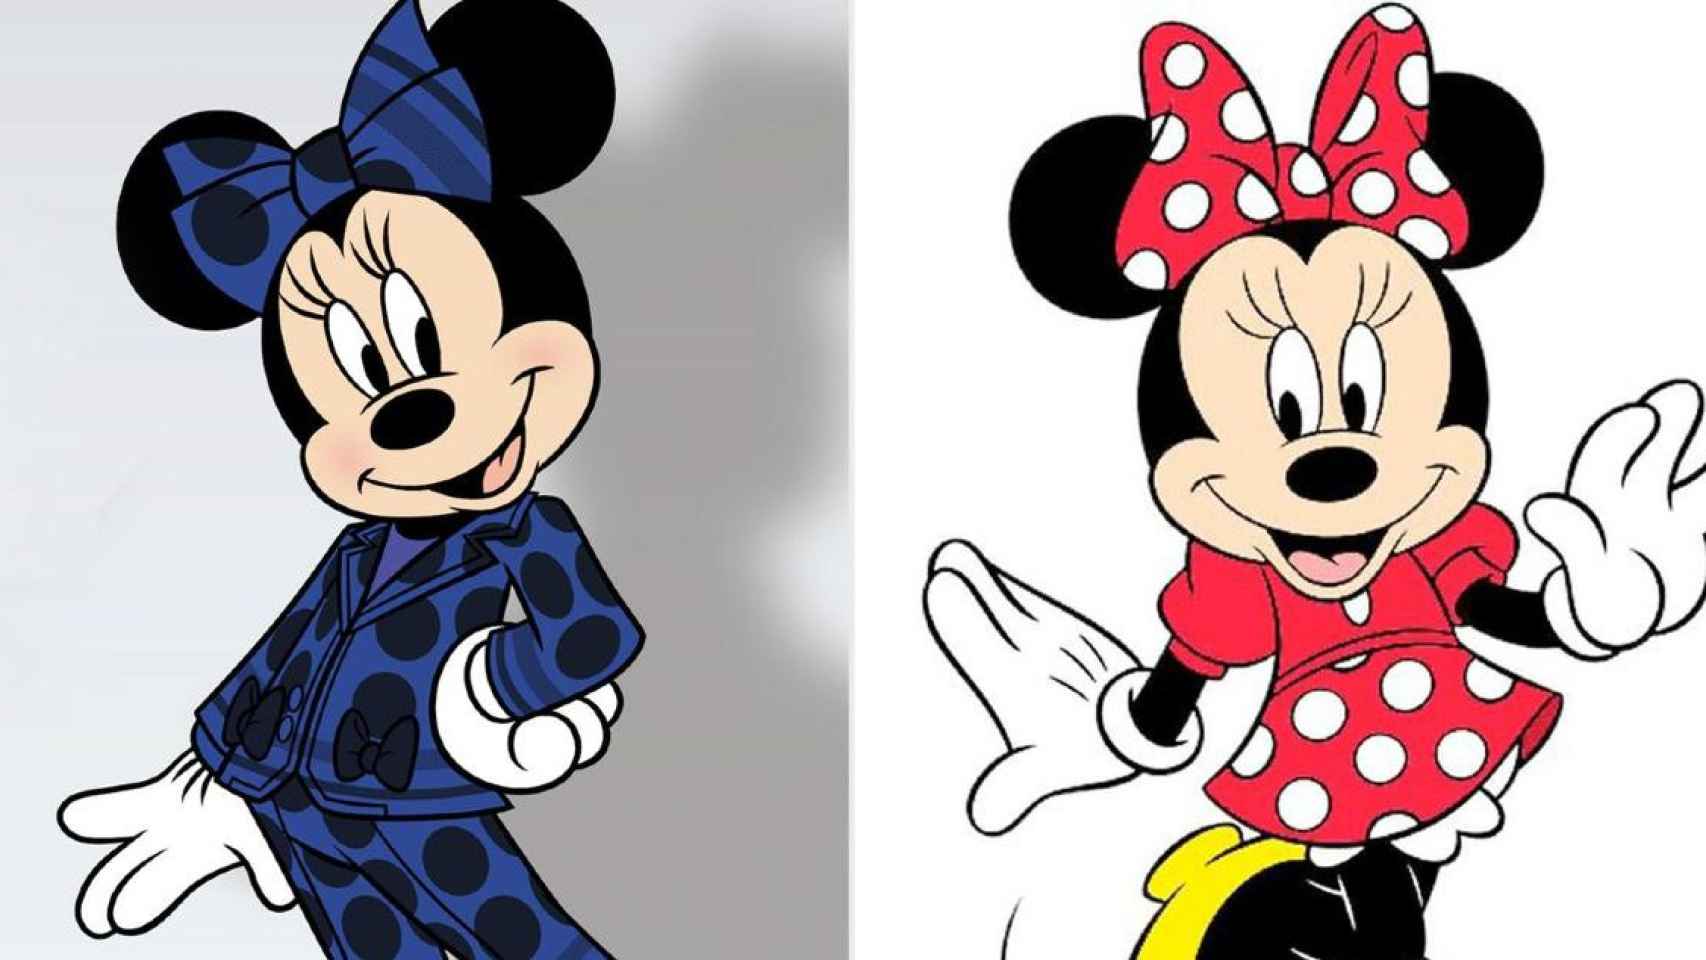 Minnie Mouse /REDES